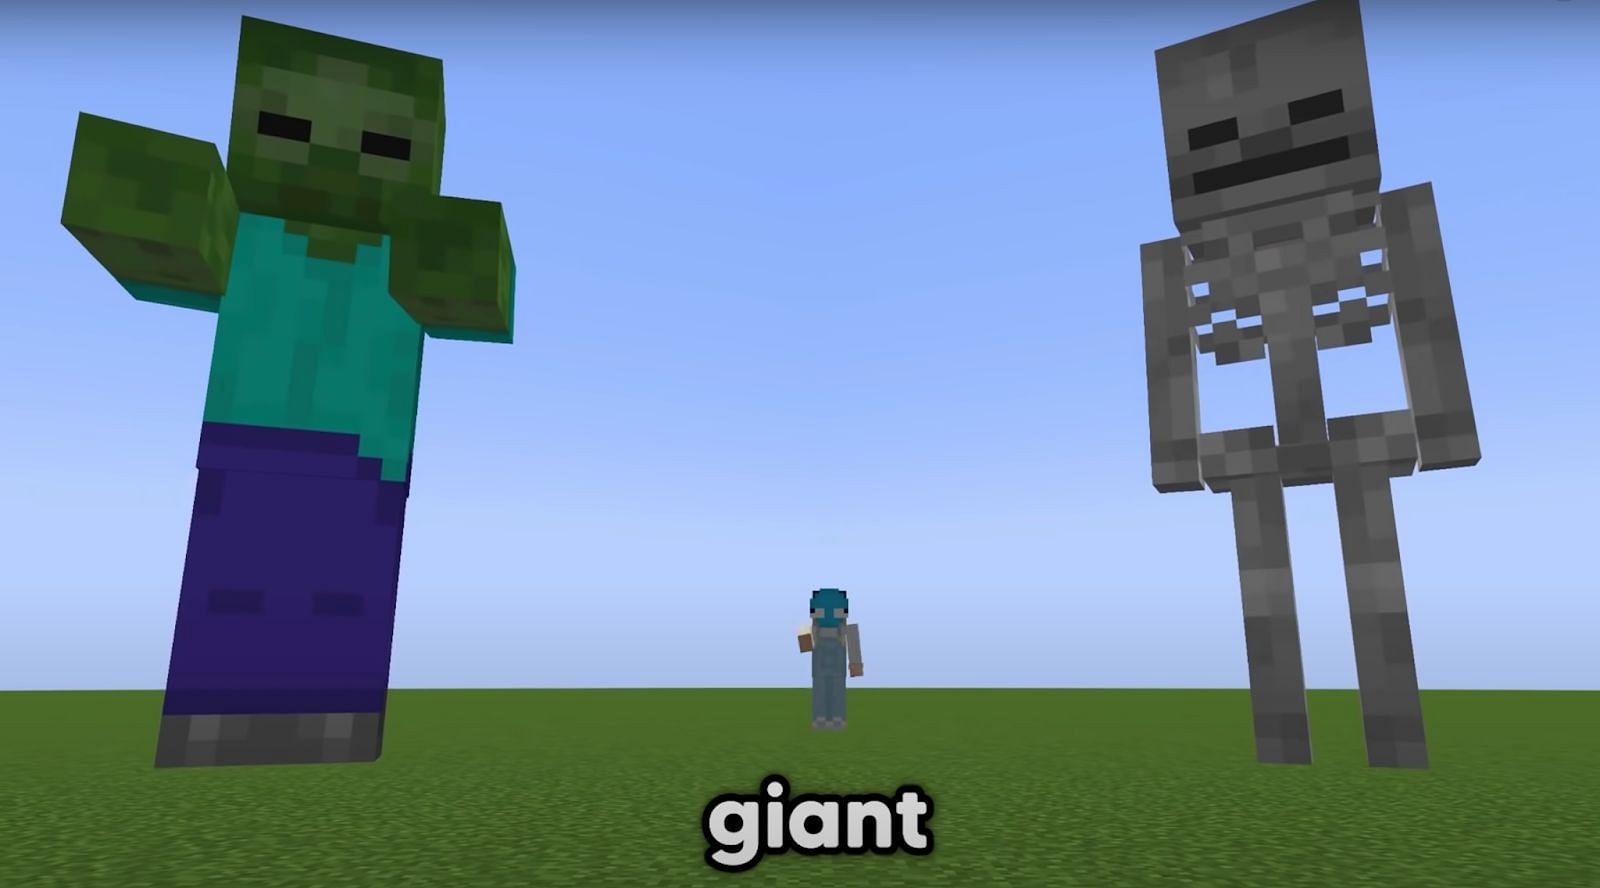 What are Giant mobs in Minecraft?